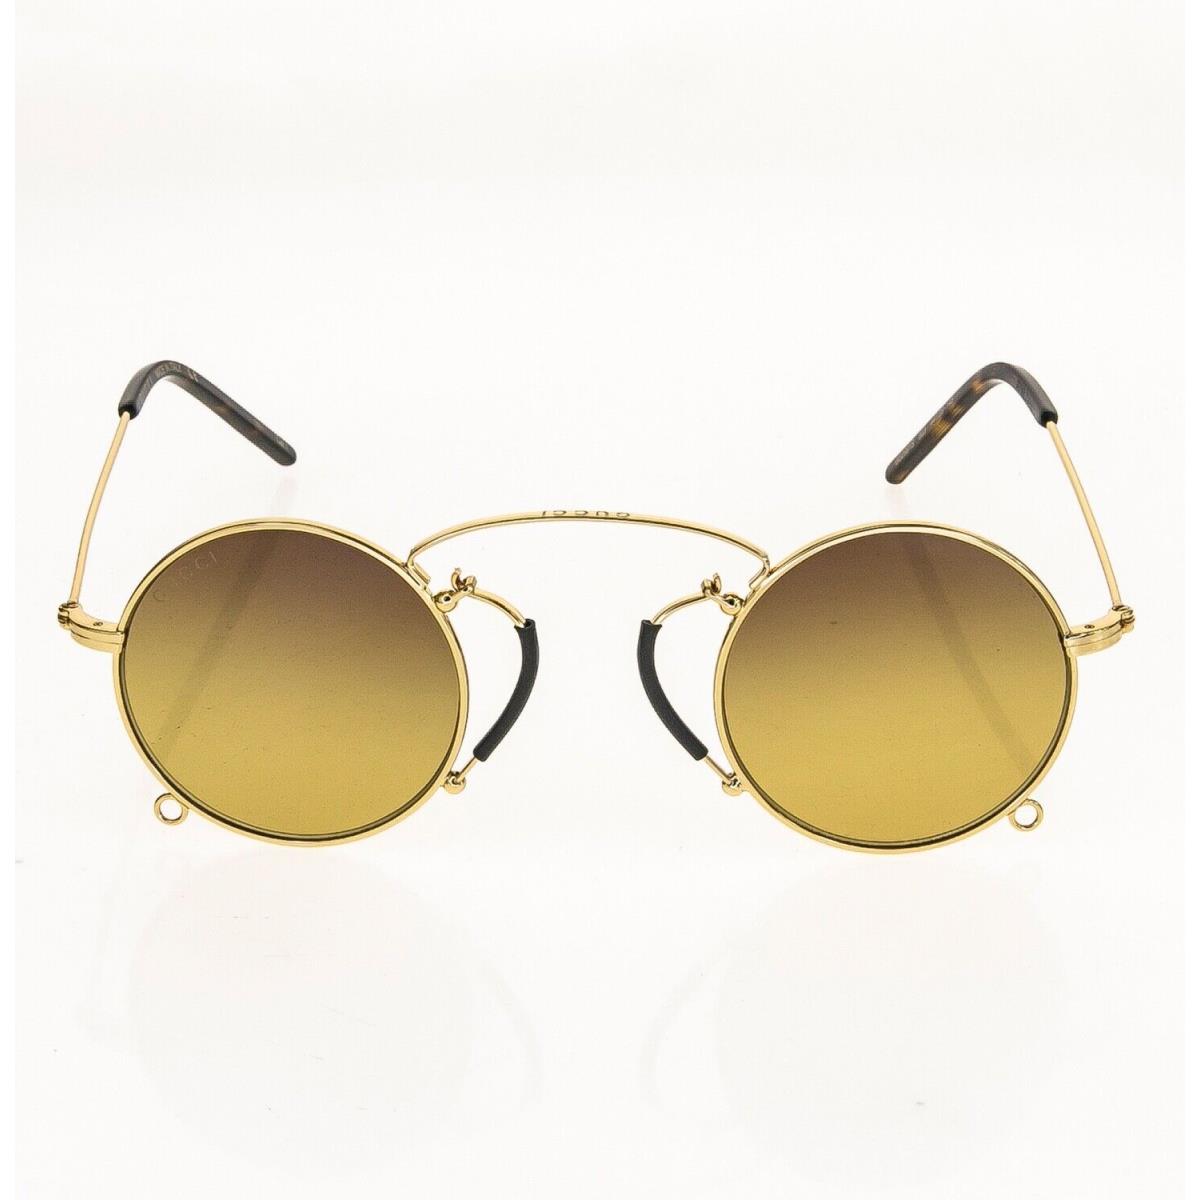 Gucci sunglasses  - 003 , Gold Frame, Brown Lens 4